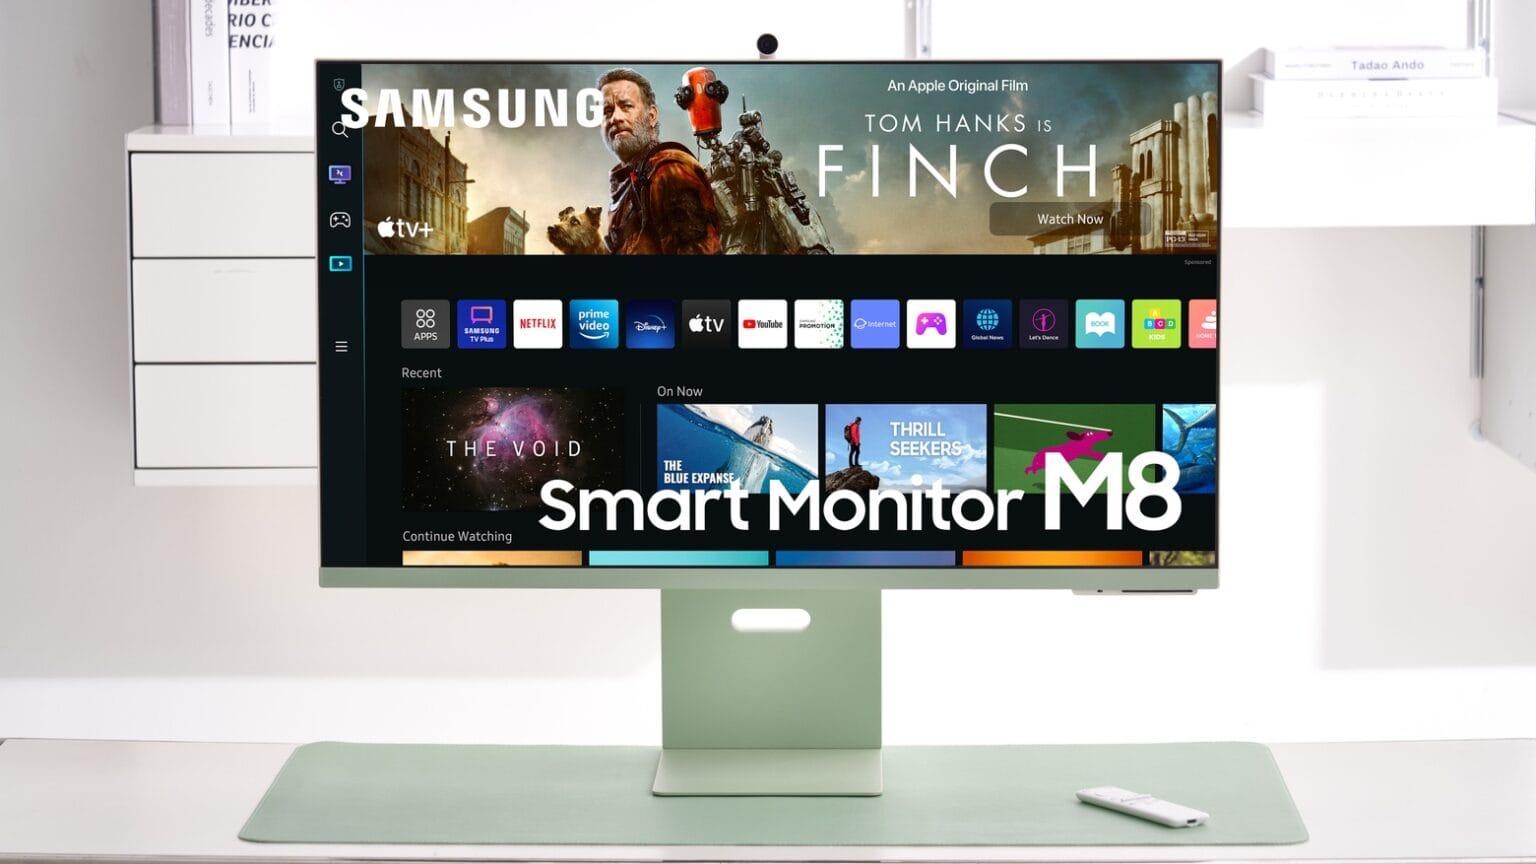 Apple Studio Display not right for you? Try Samsung Smart Monitor M8 instead.